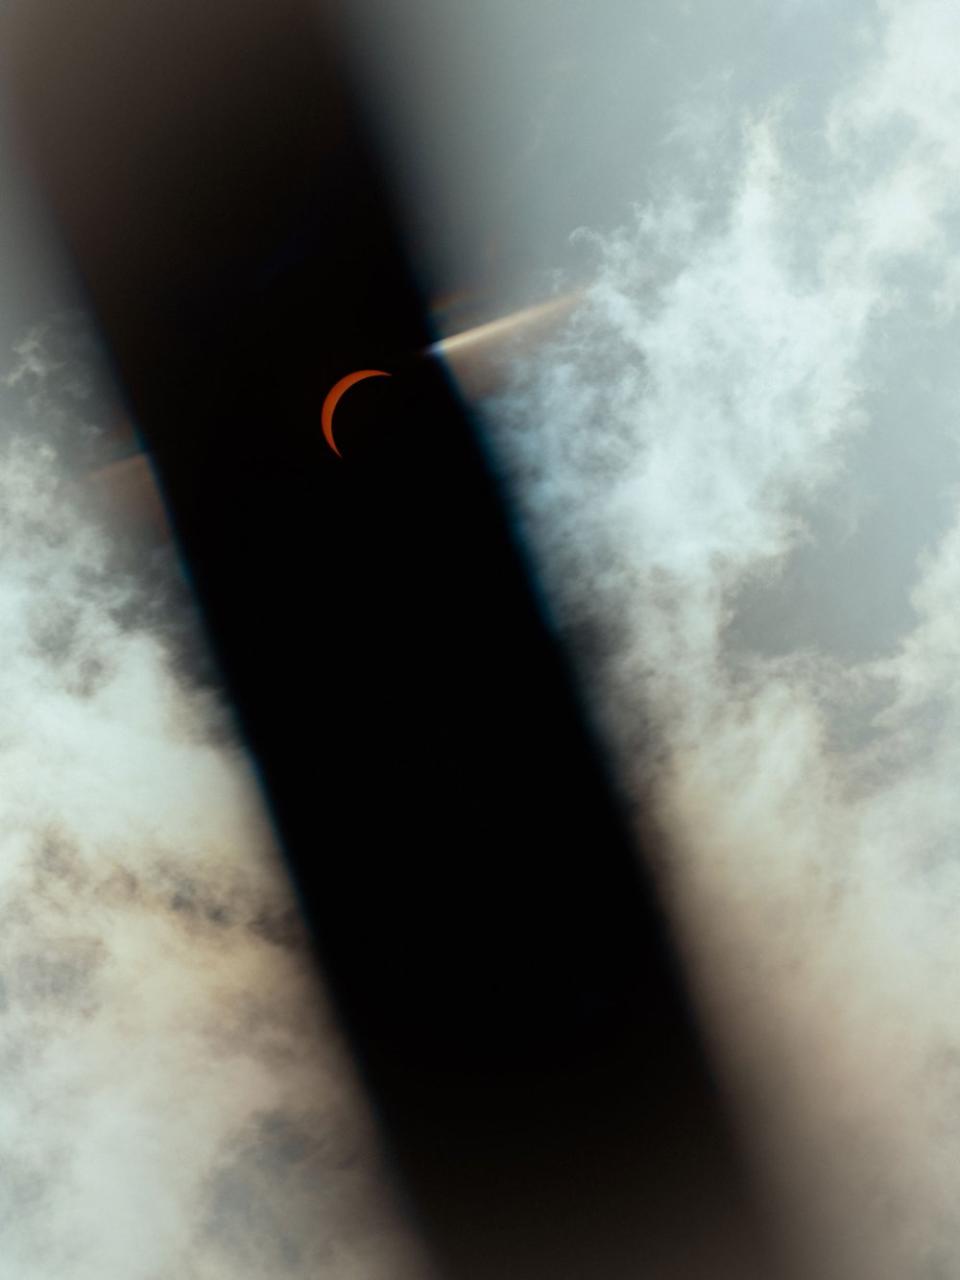 The solar eclipse nearing totality in Dallas, Texas.<span class="copyright">Jake Dockins for TIME</span>